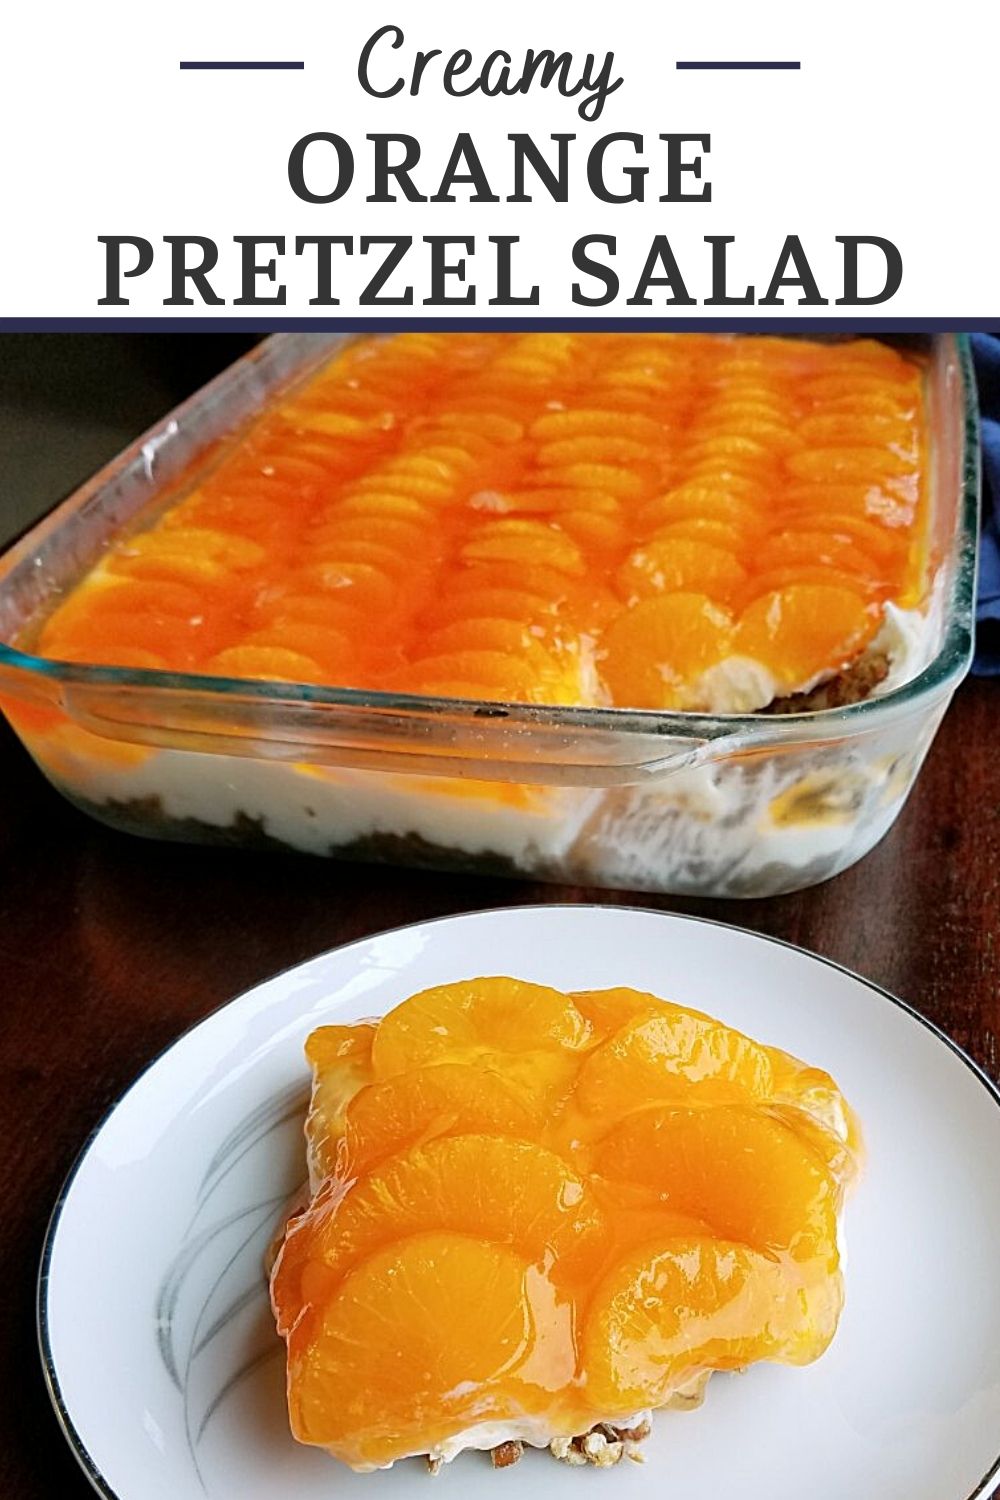 Salty pretzel crust, vanilla cream cheese center and a blast of orange on top, this orange pretzel salad has it all. It is a fun flavor twist on the classic strawberry pretzel salad and it is popping with citrus flavor!